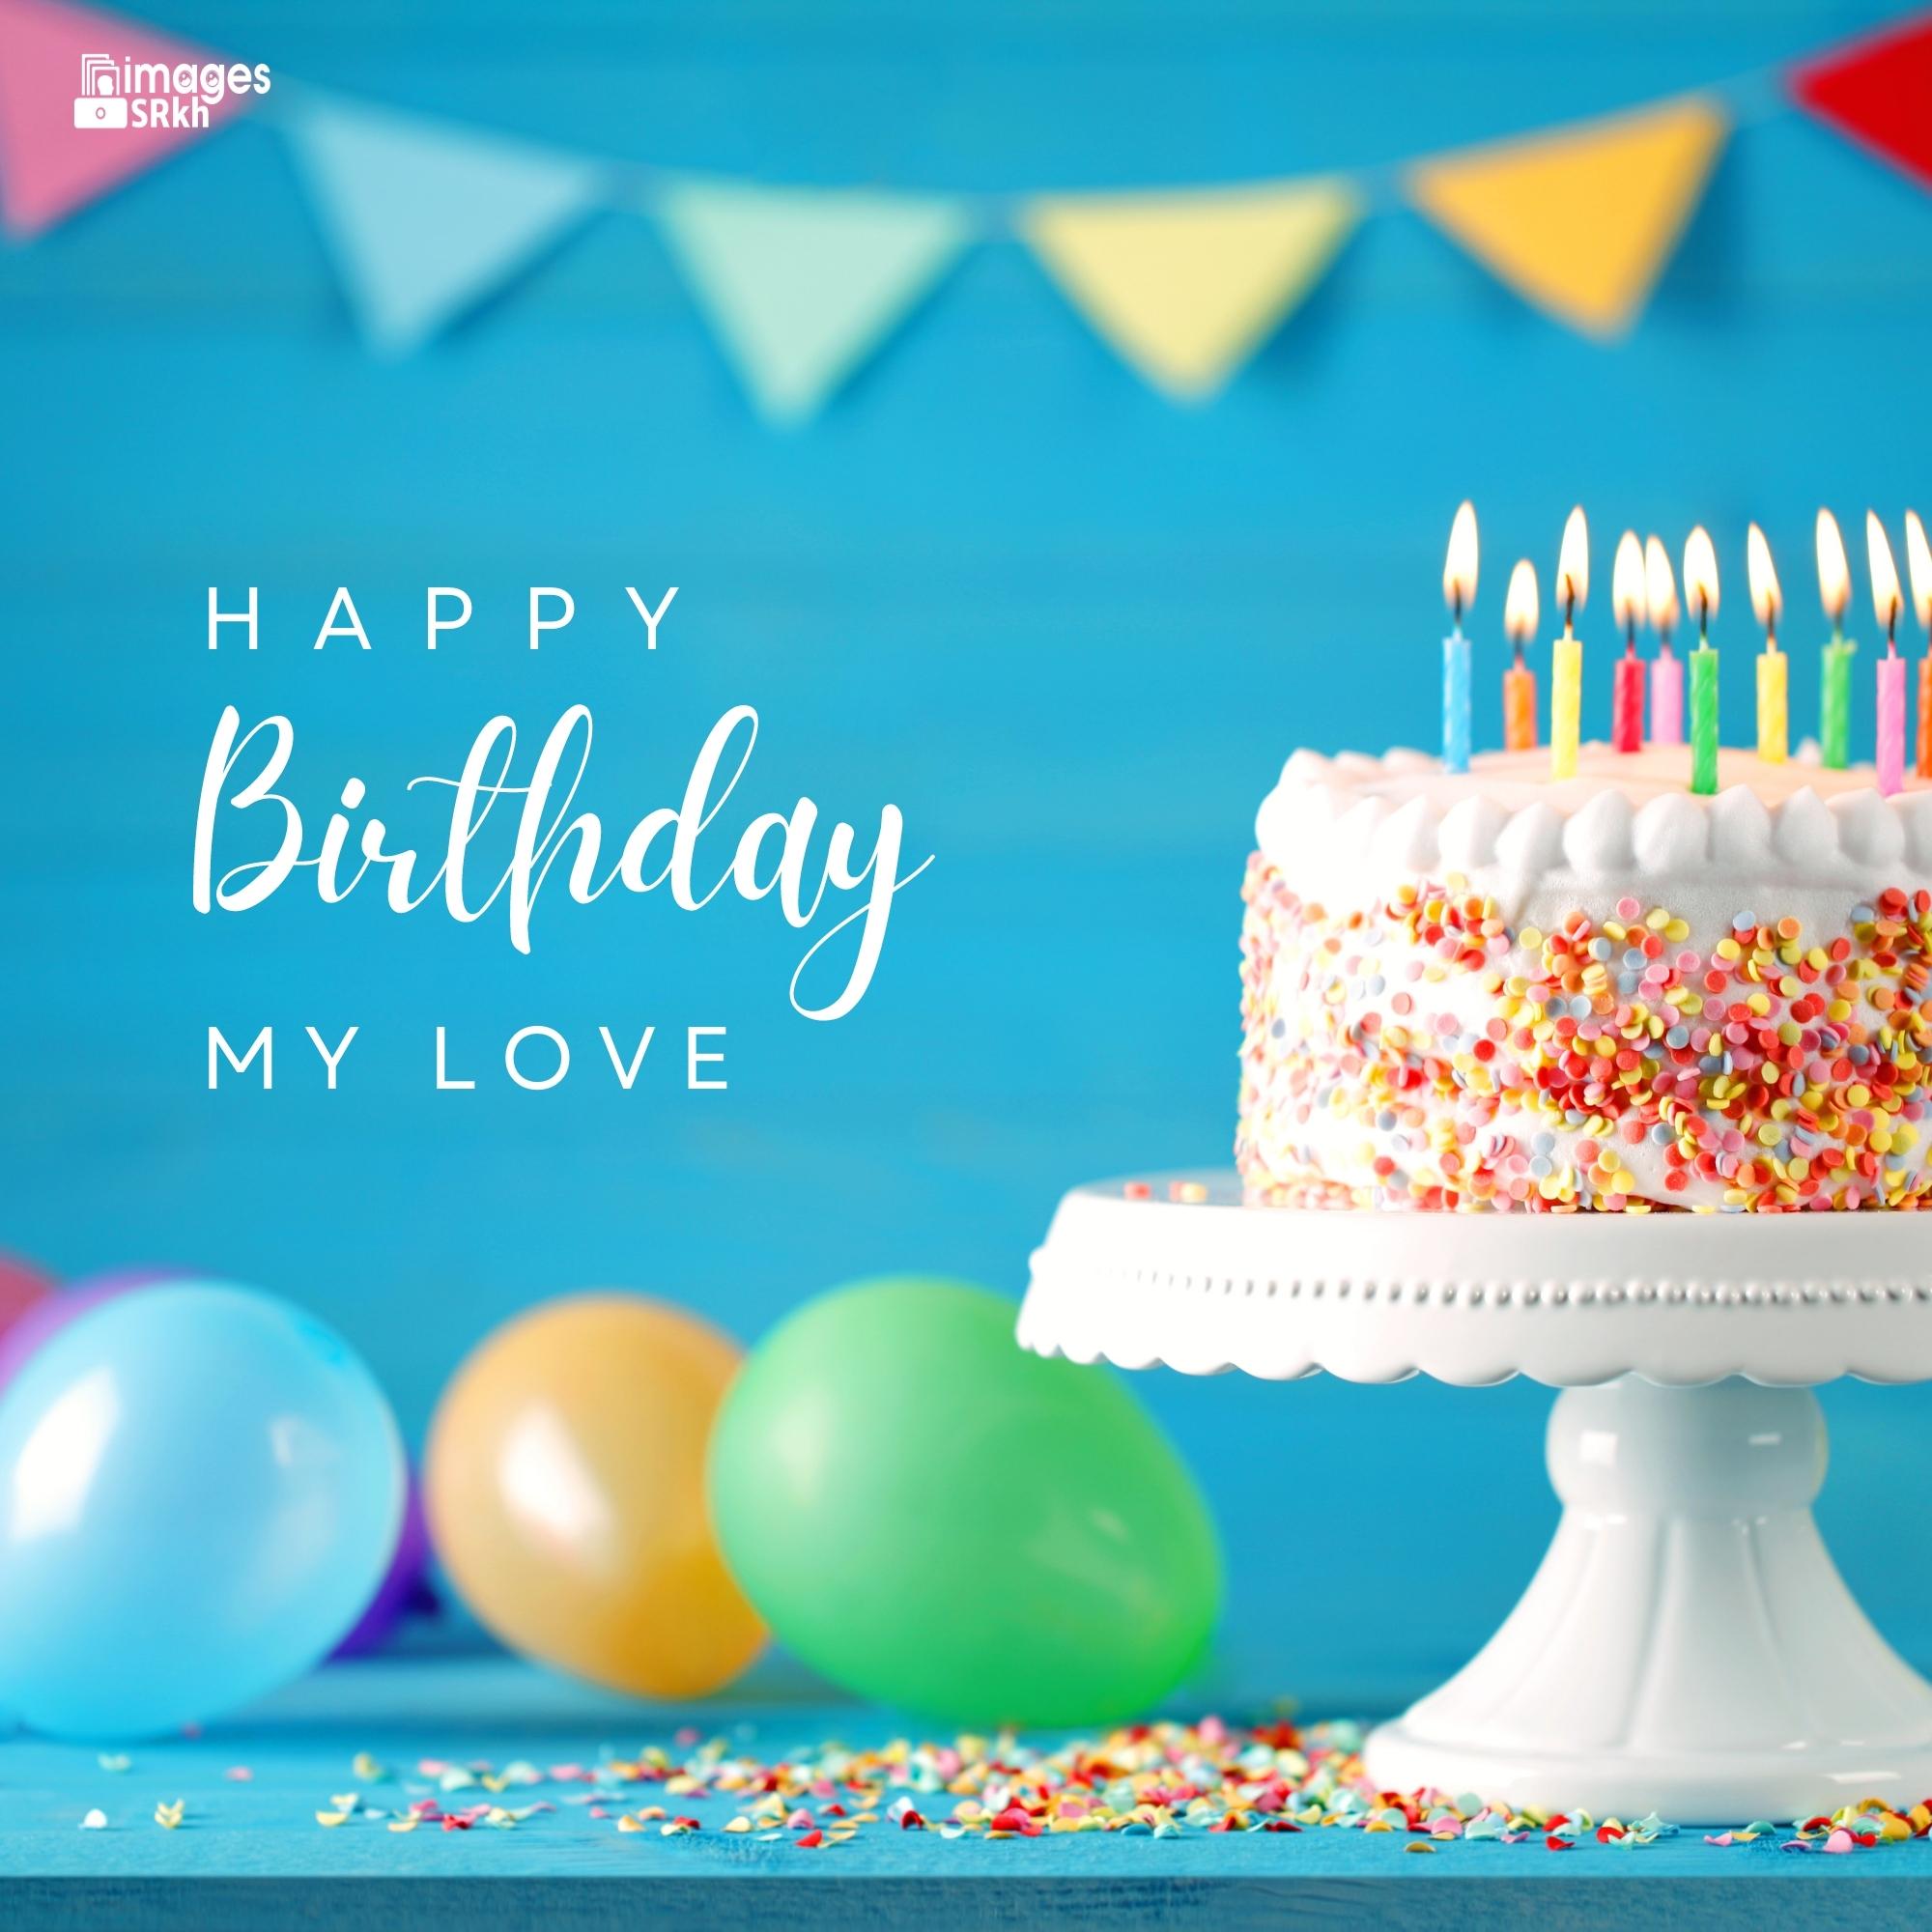 Lover Happy Birthday Images Hd